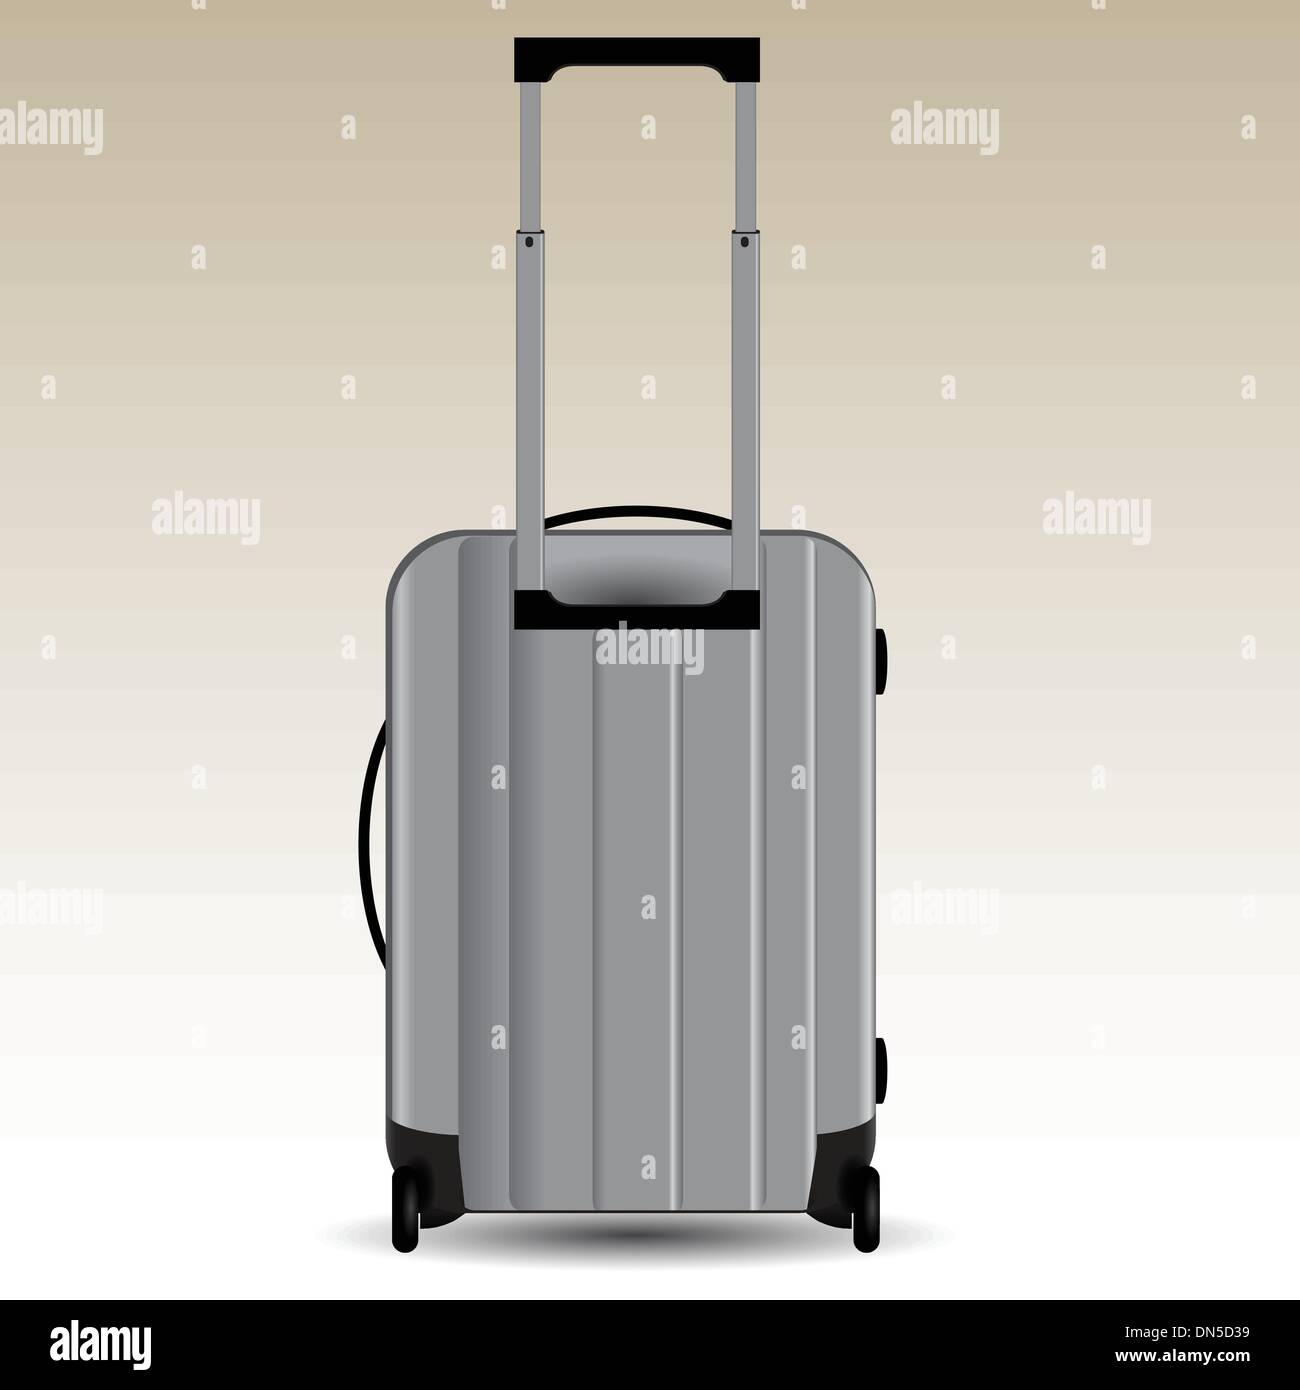 Suitcase on wheels Stock Vector